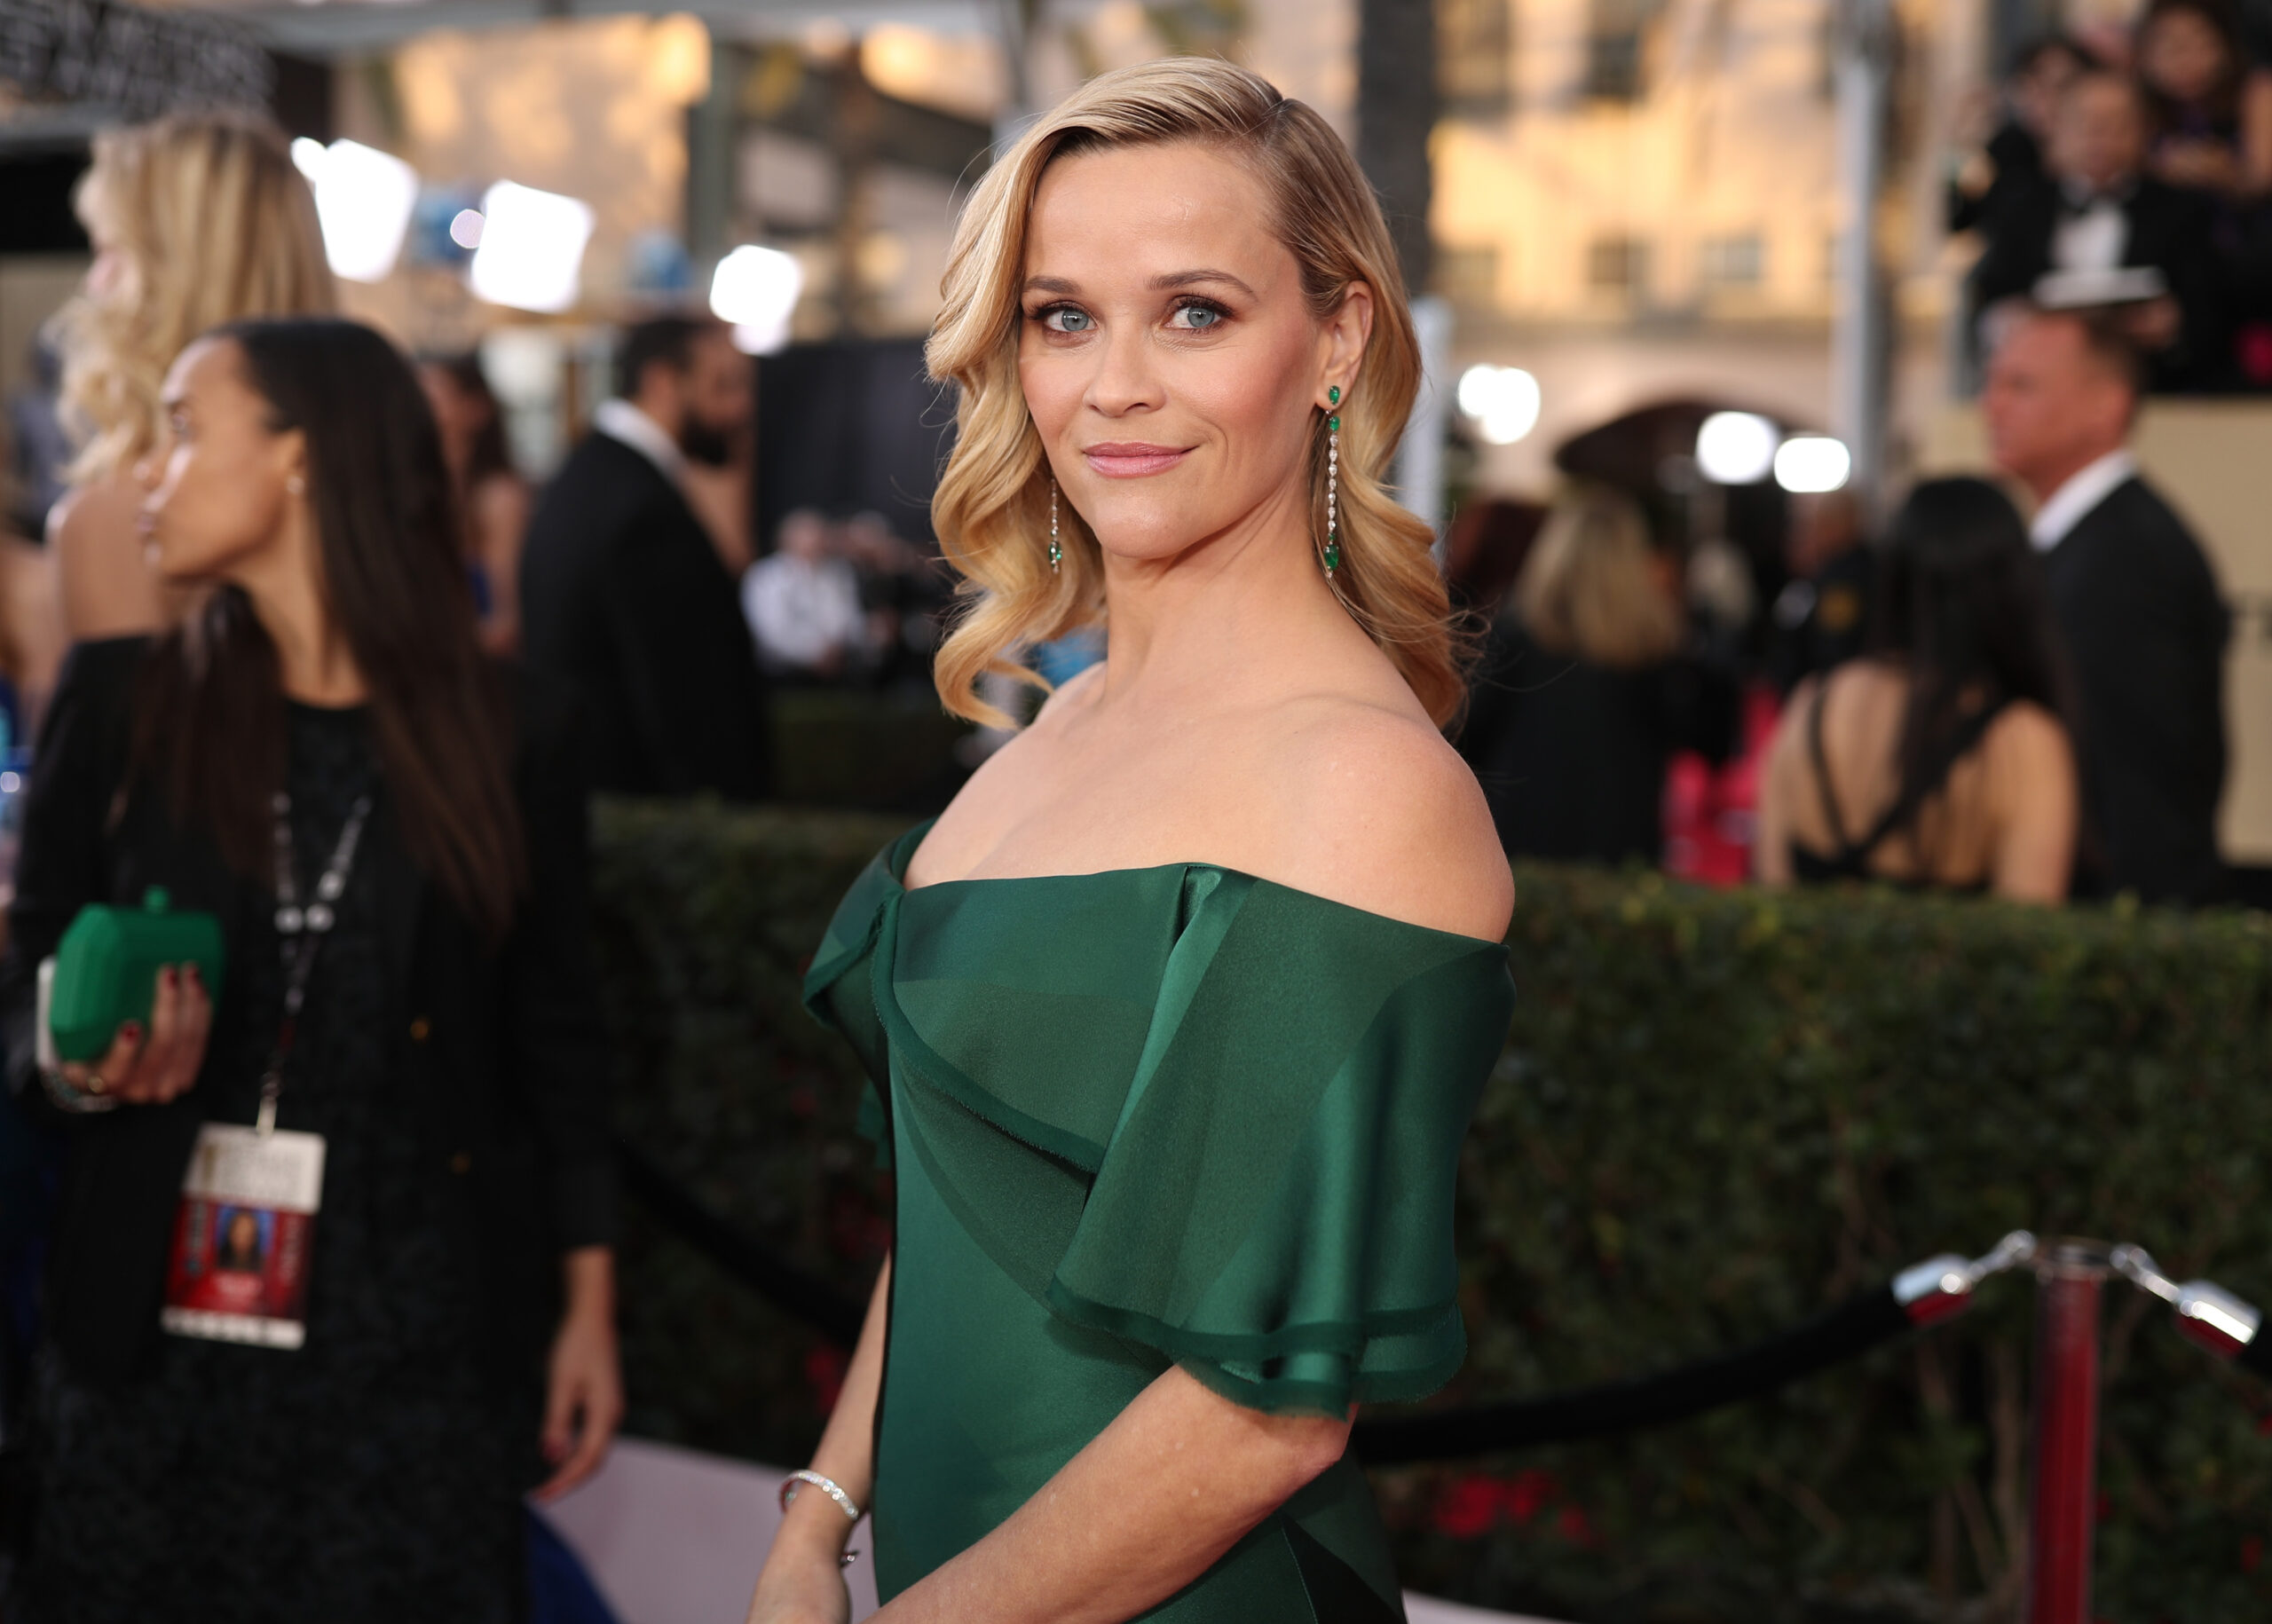 Reese Witherspoon is seen on April 15, 2019 in Los Angeles, News Photo -  Getty Images